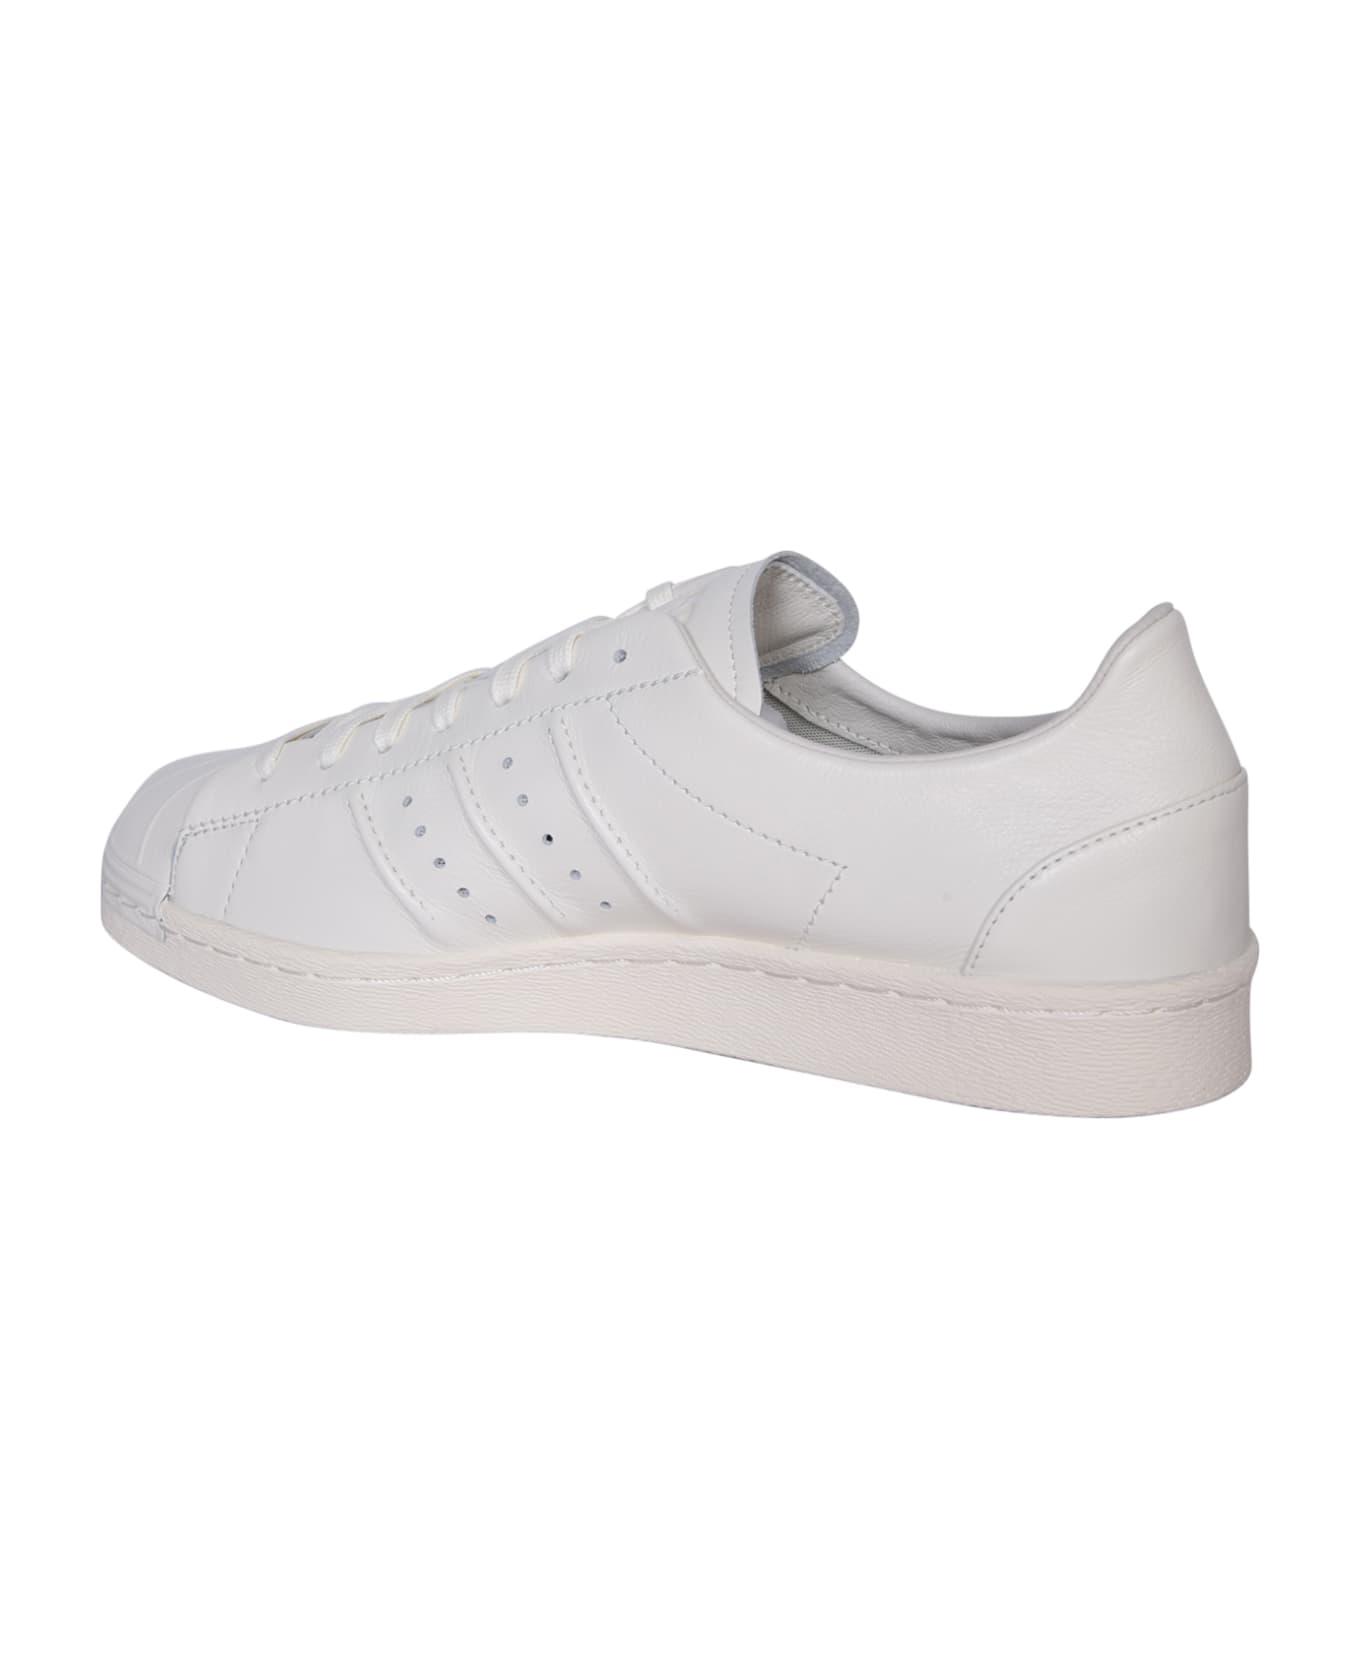 Y-3 Superstar White Sneakers - White